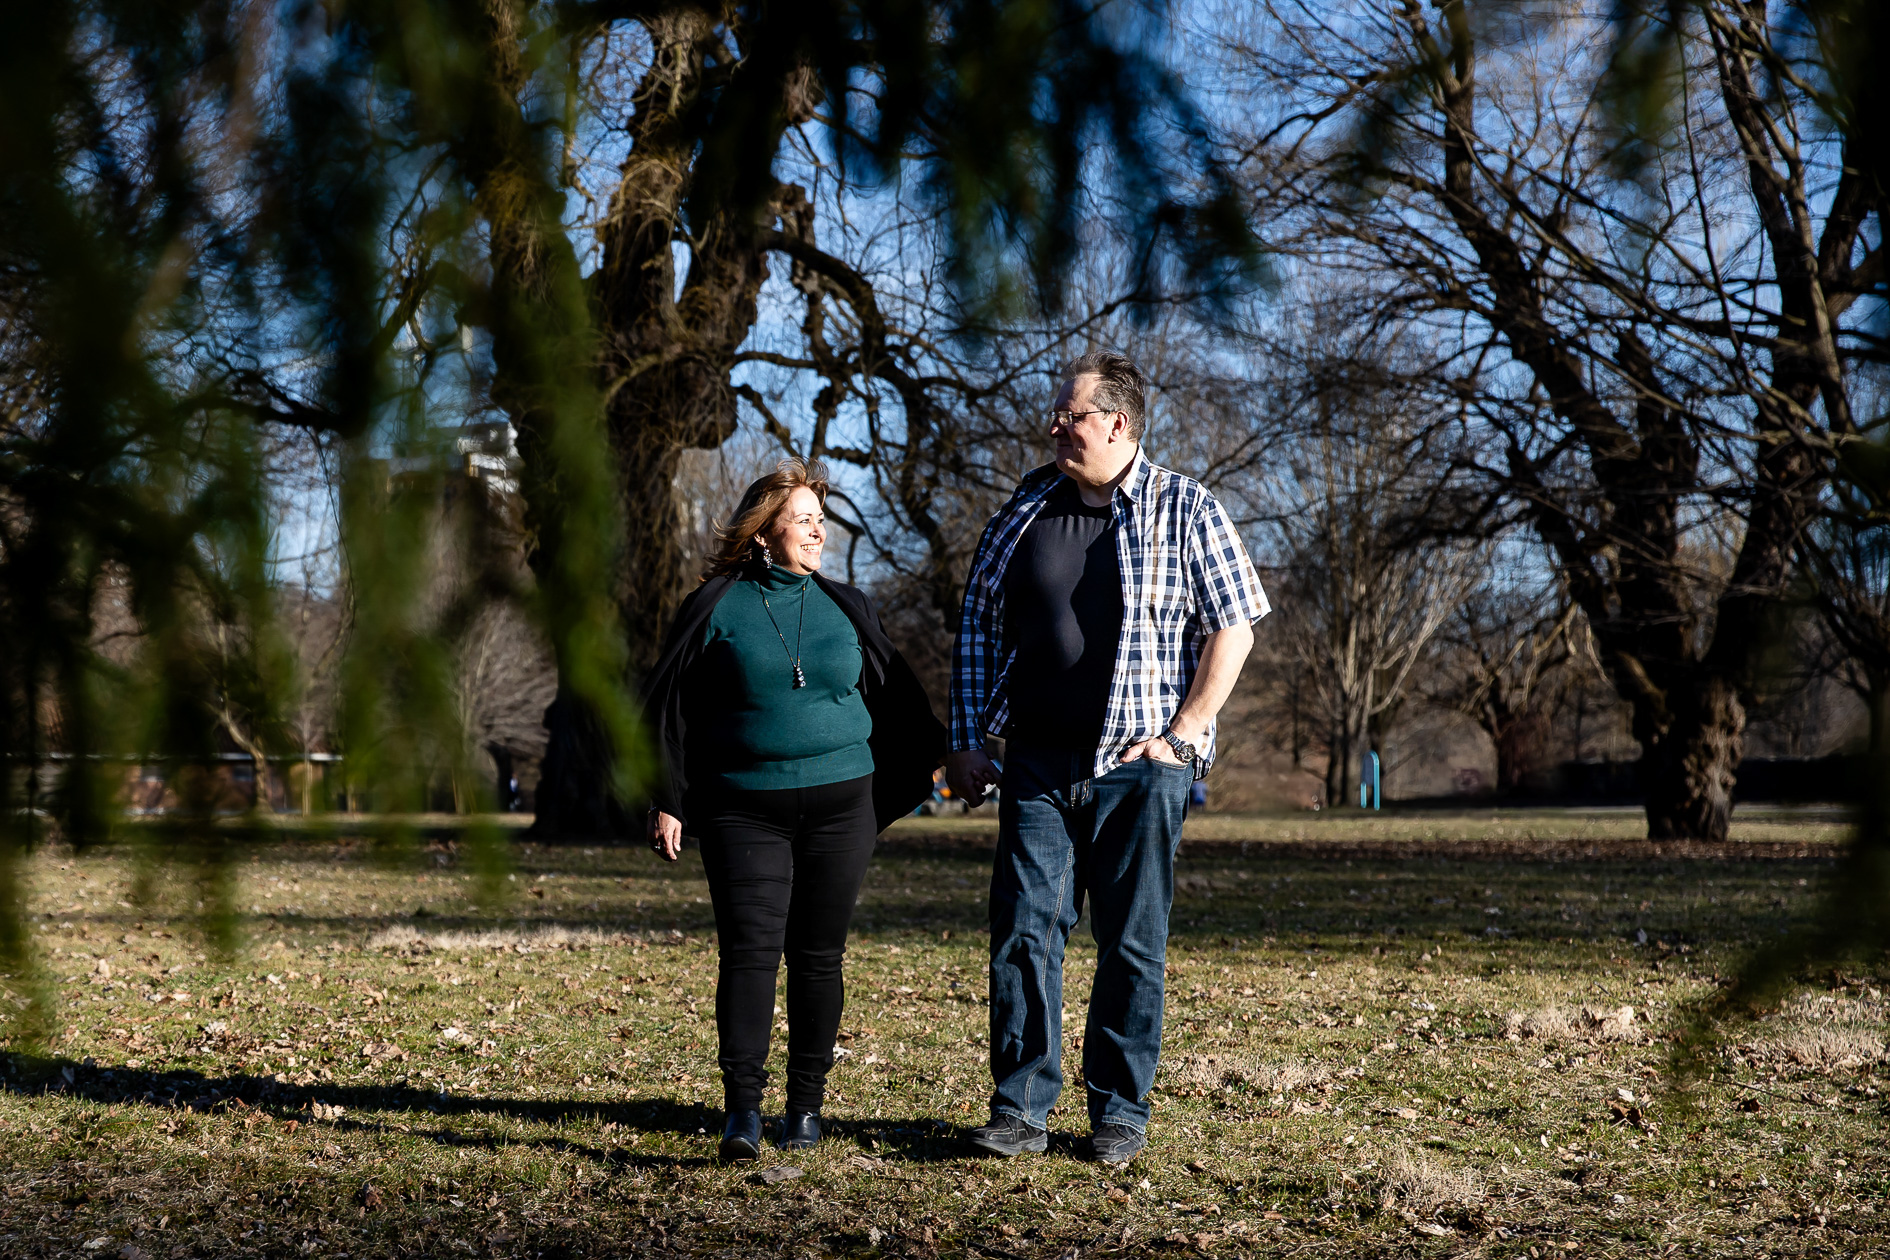 Winter engagement session at Gibbons Park